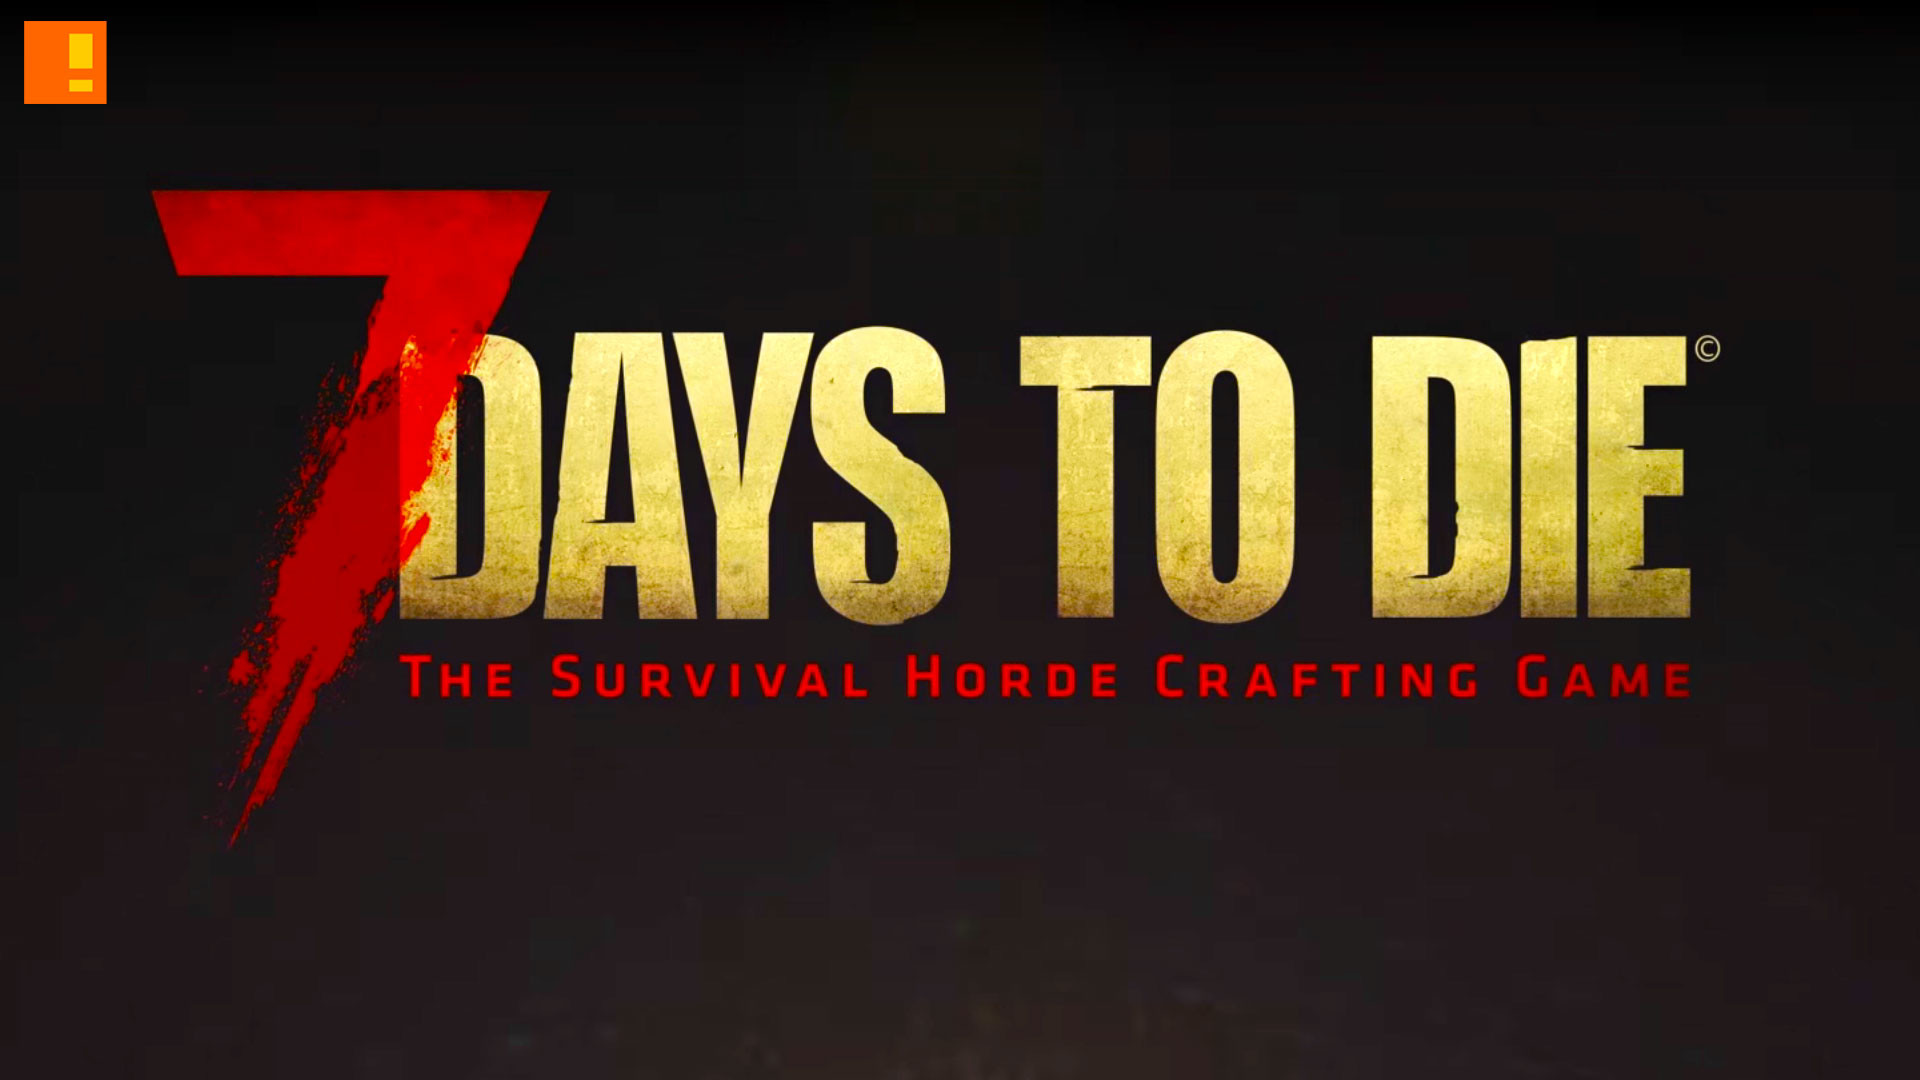 1920x1080 7 days to die, survival, crafting, game, announcement, trailer, live